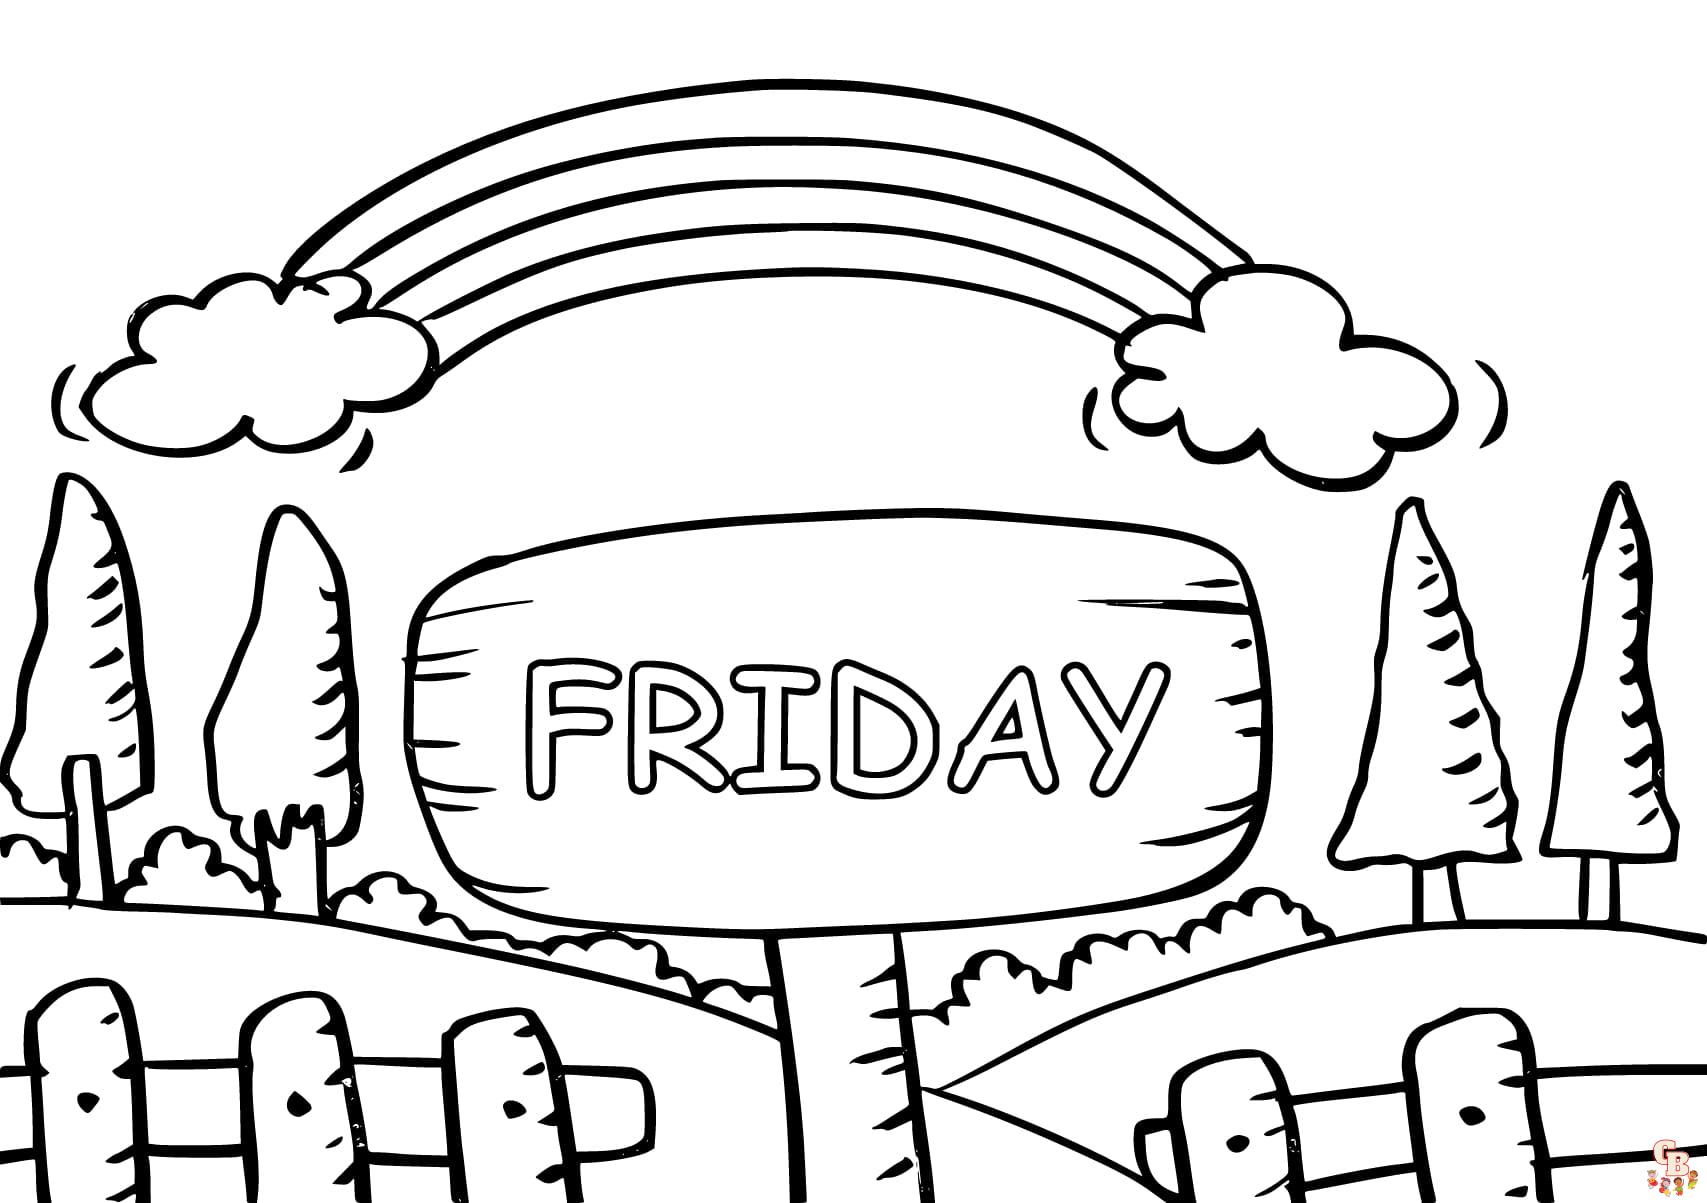 Friaday coloring pages to print